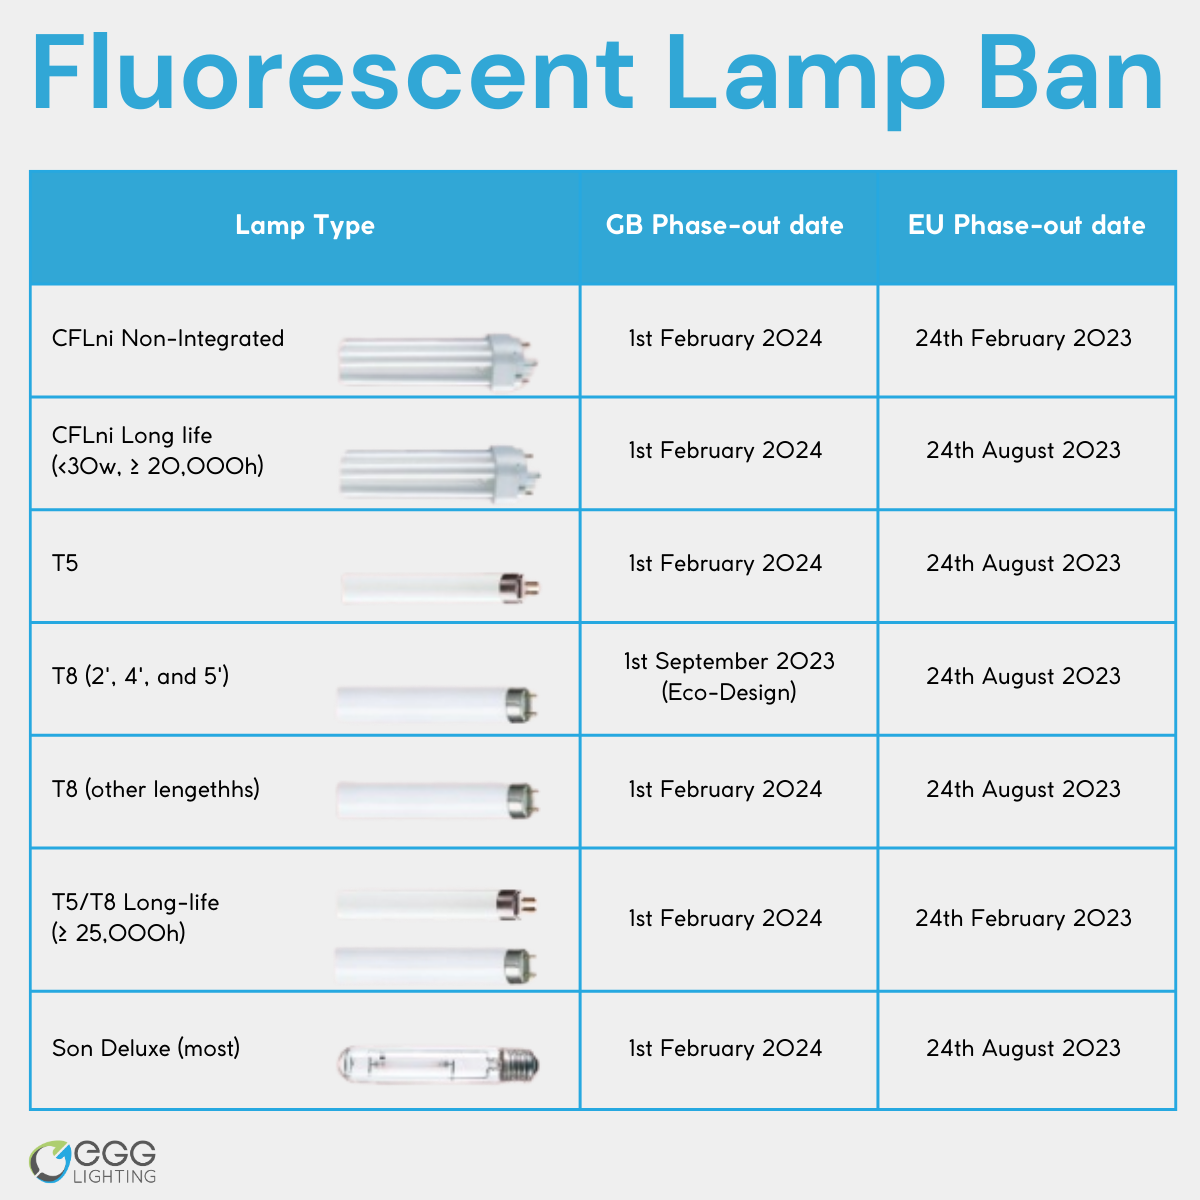 Table outlining the fluorescent lamps ban dates and types of bulbs banned in the UK and EU.